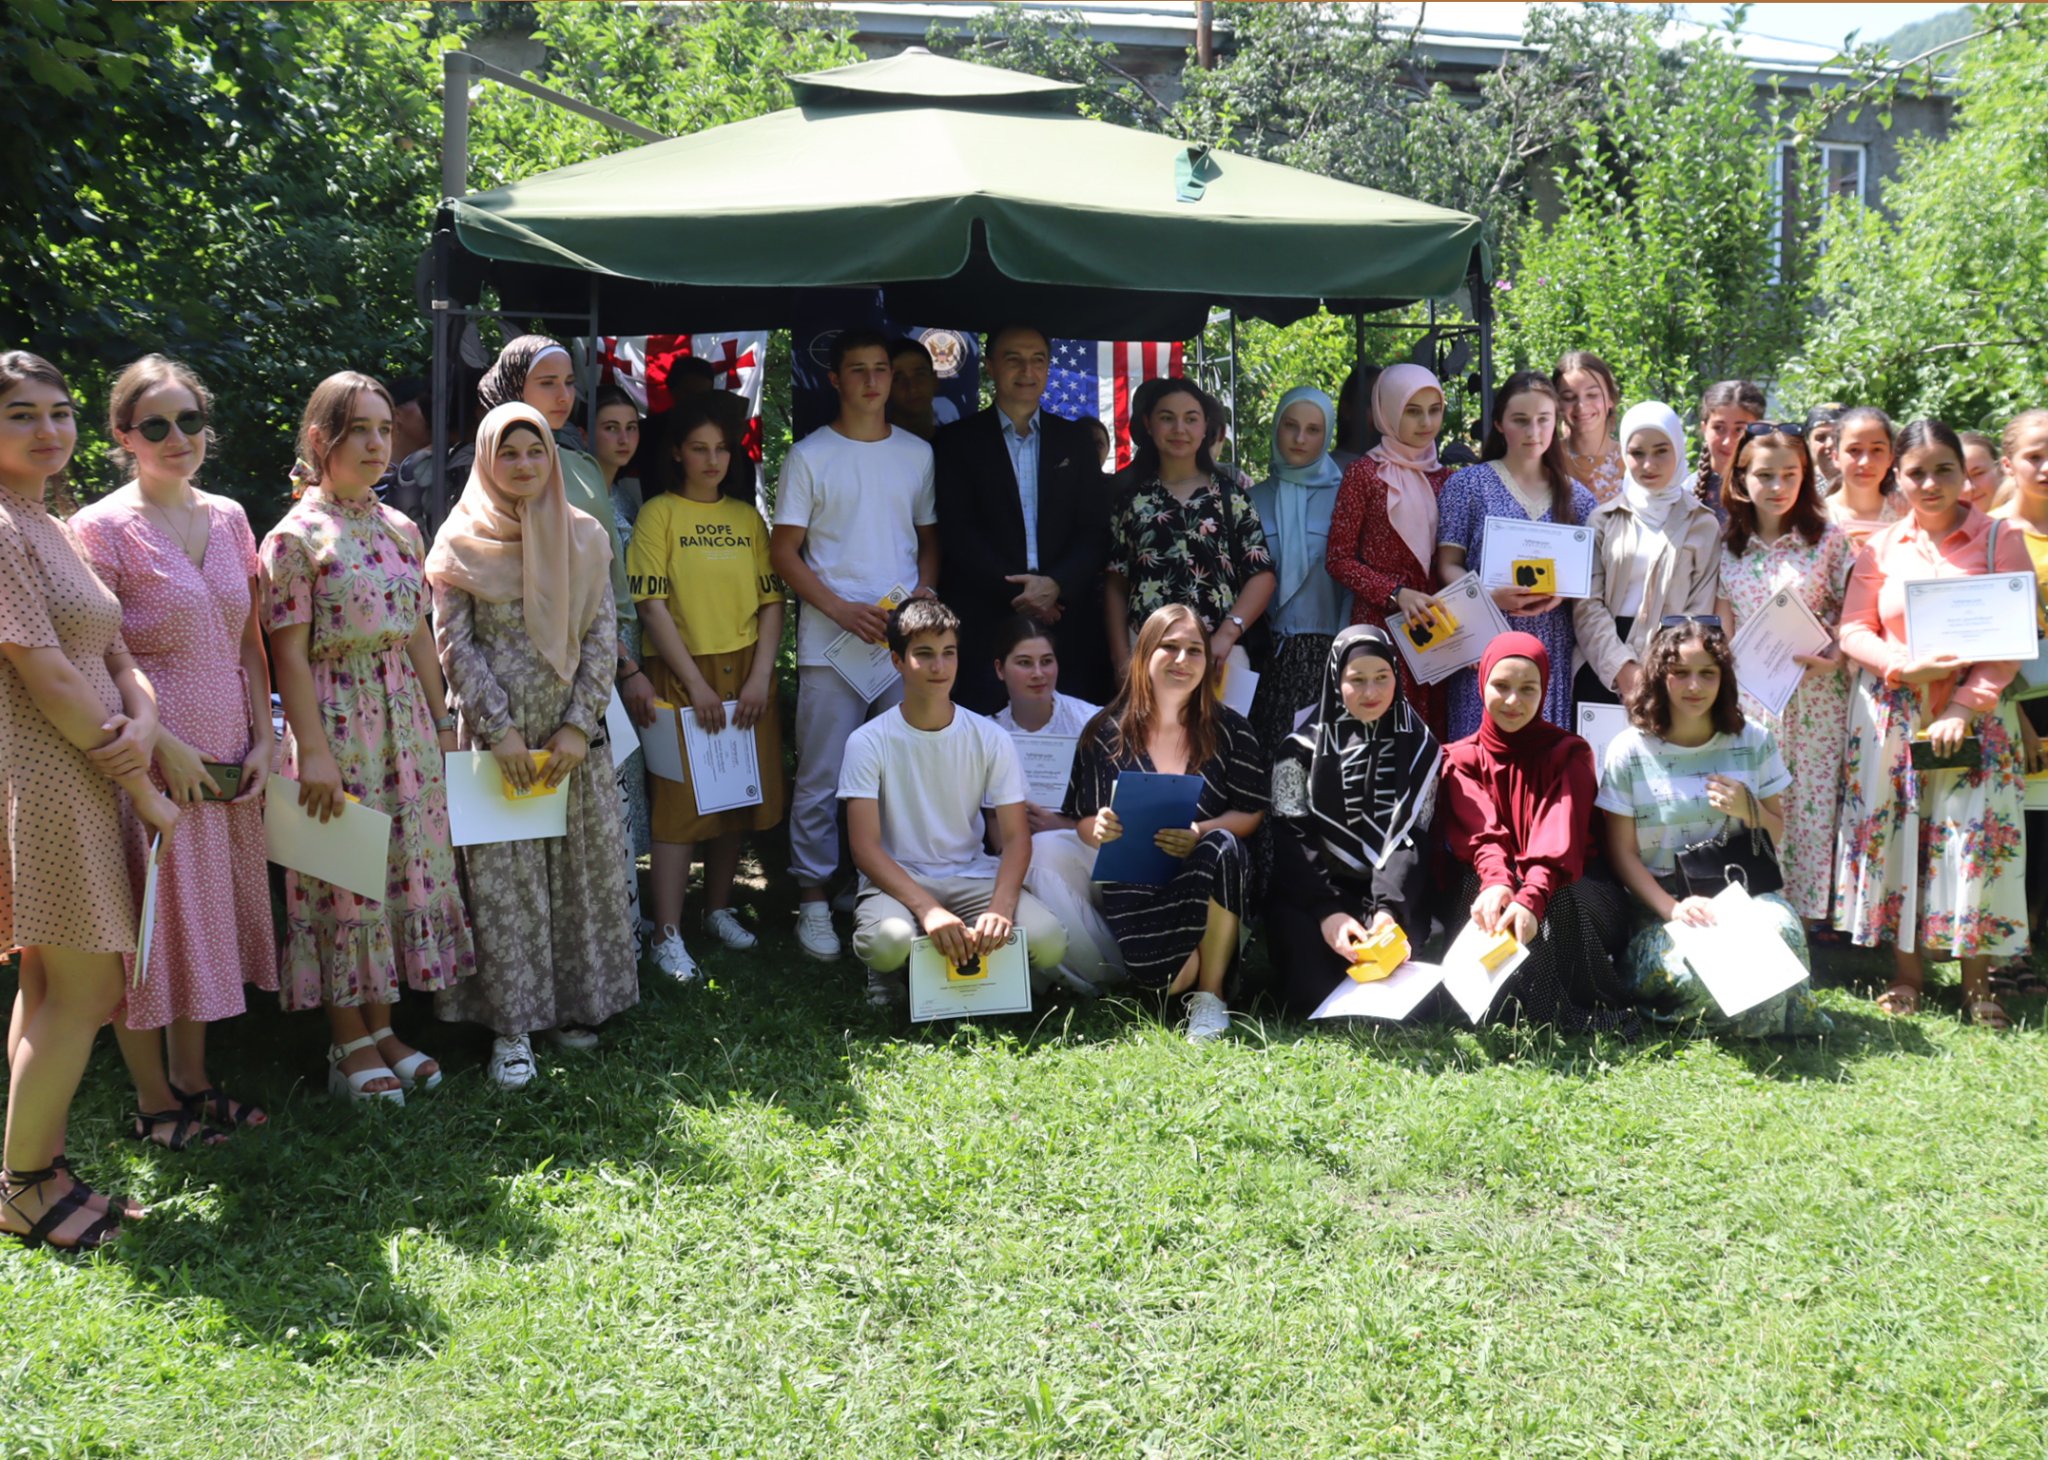 The graduation Ceremony for the project participants